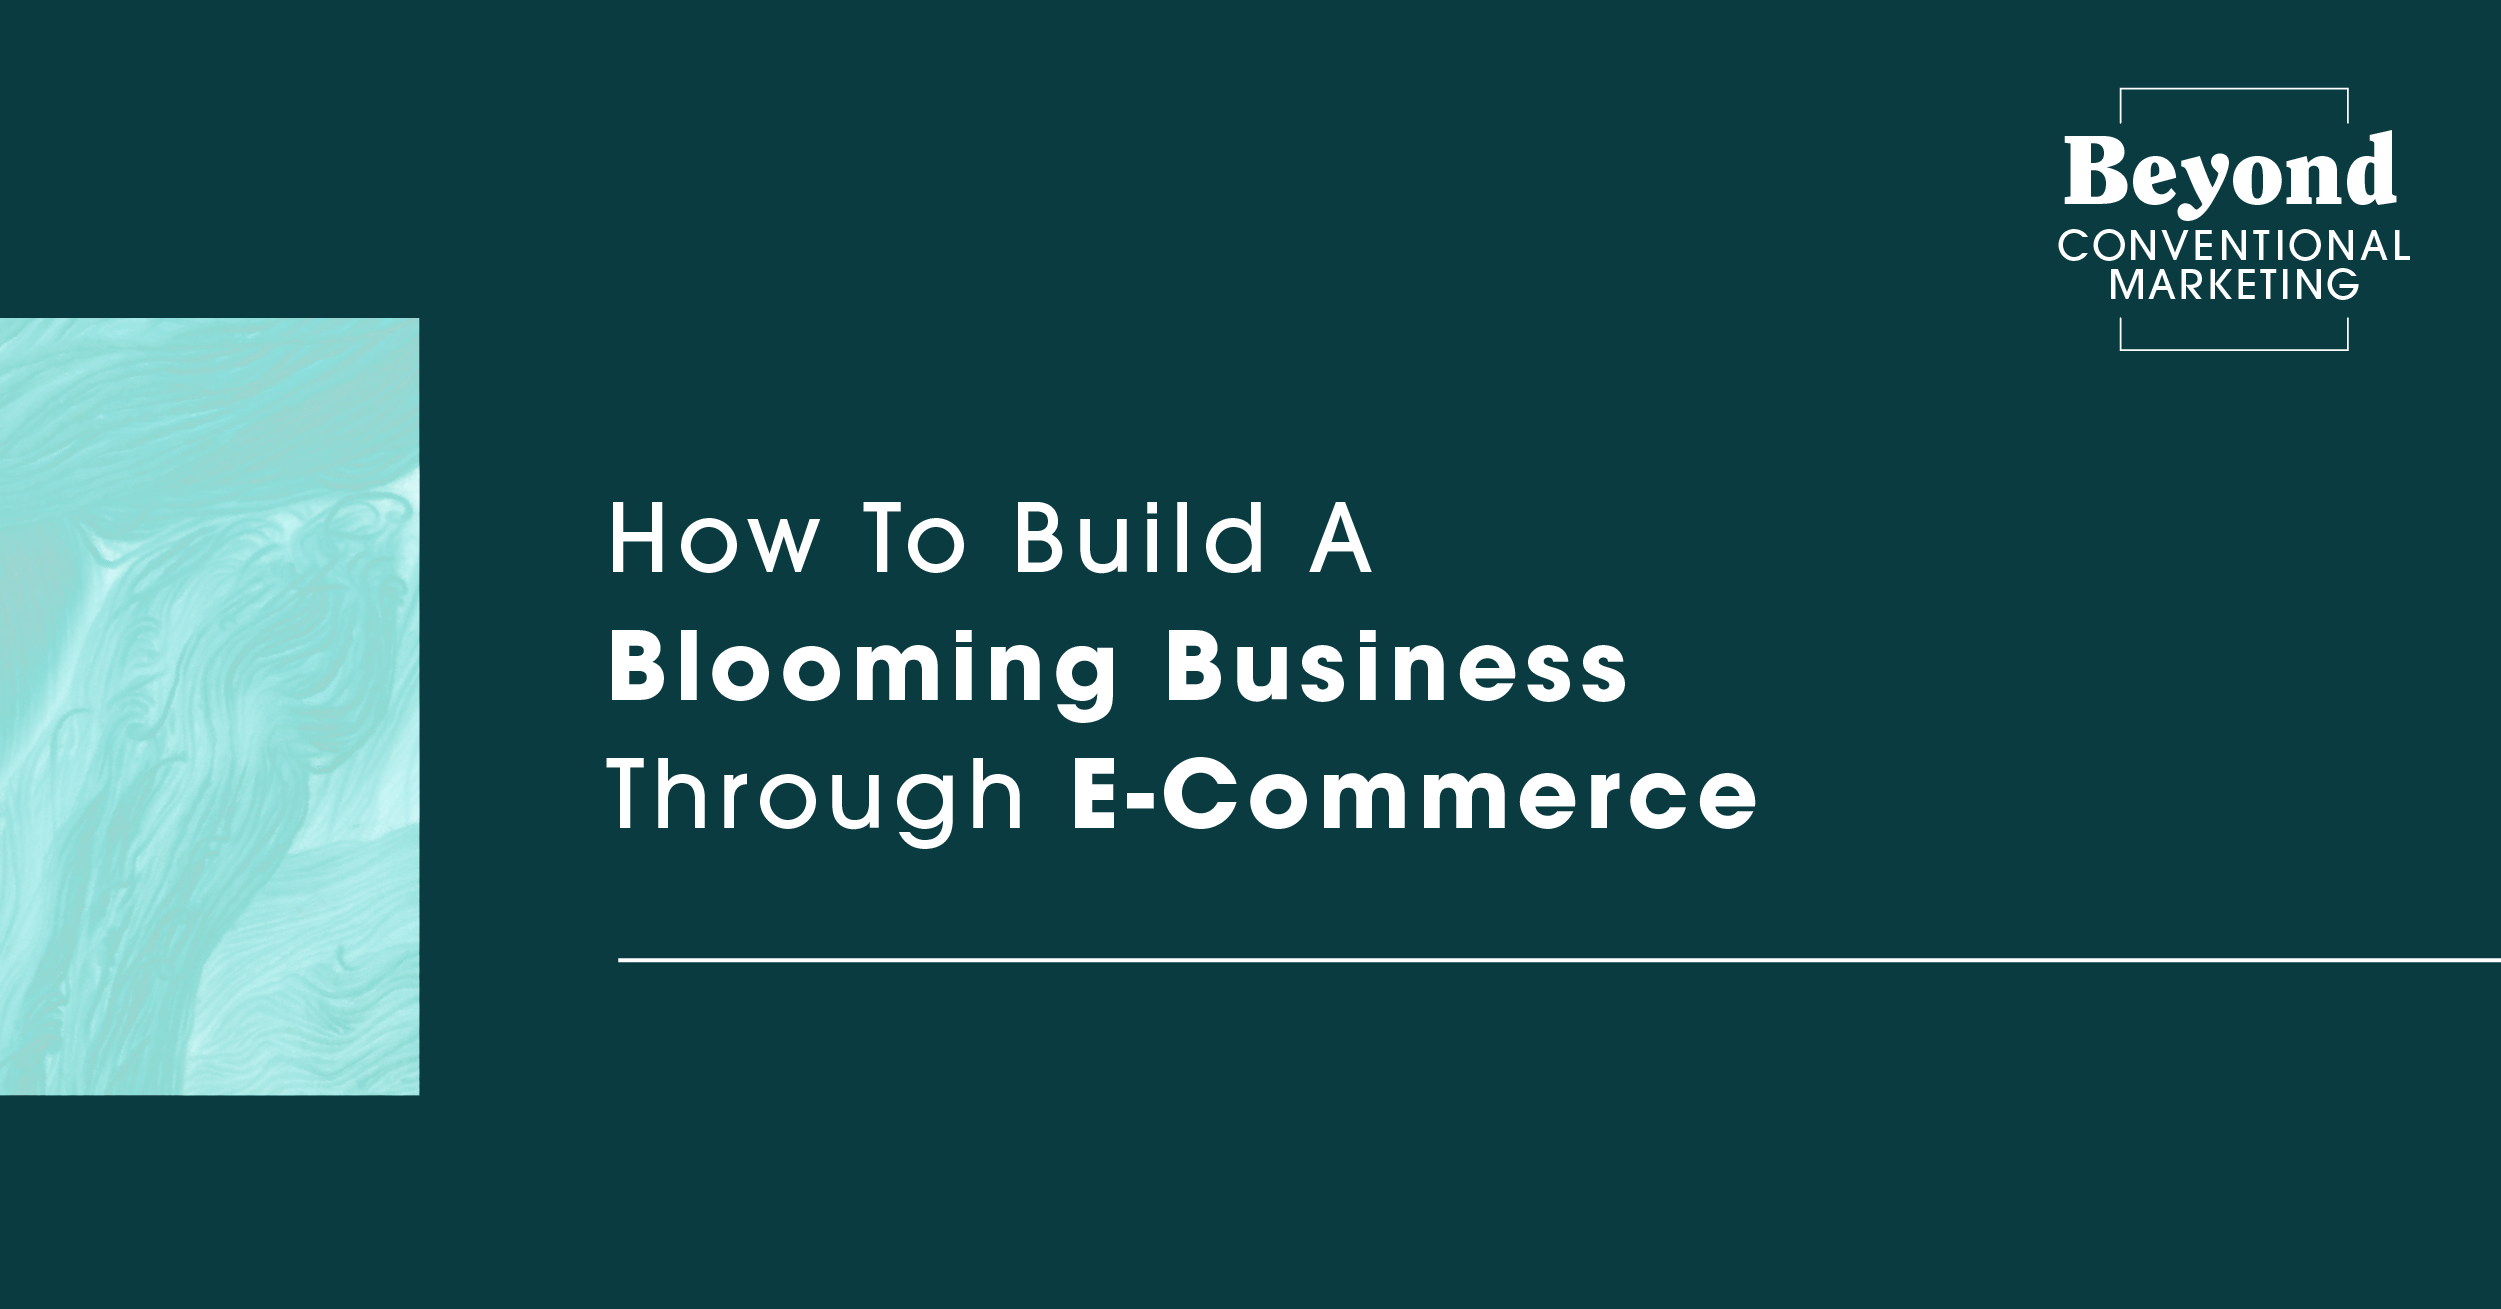 How To Build A Blooming Business Through E-Commerce